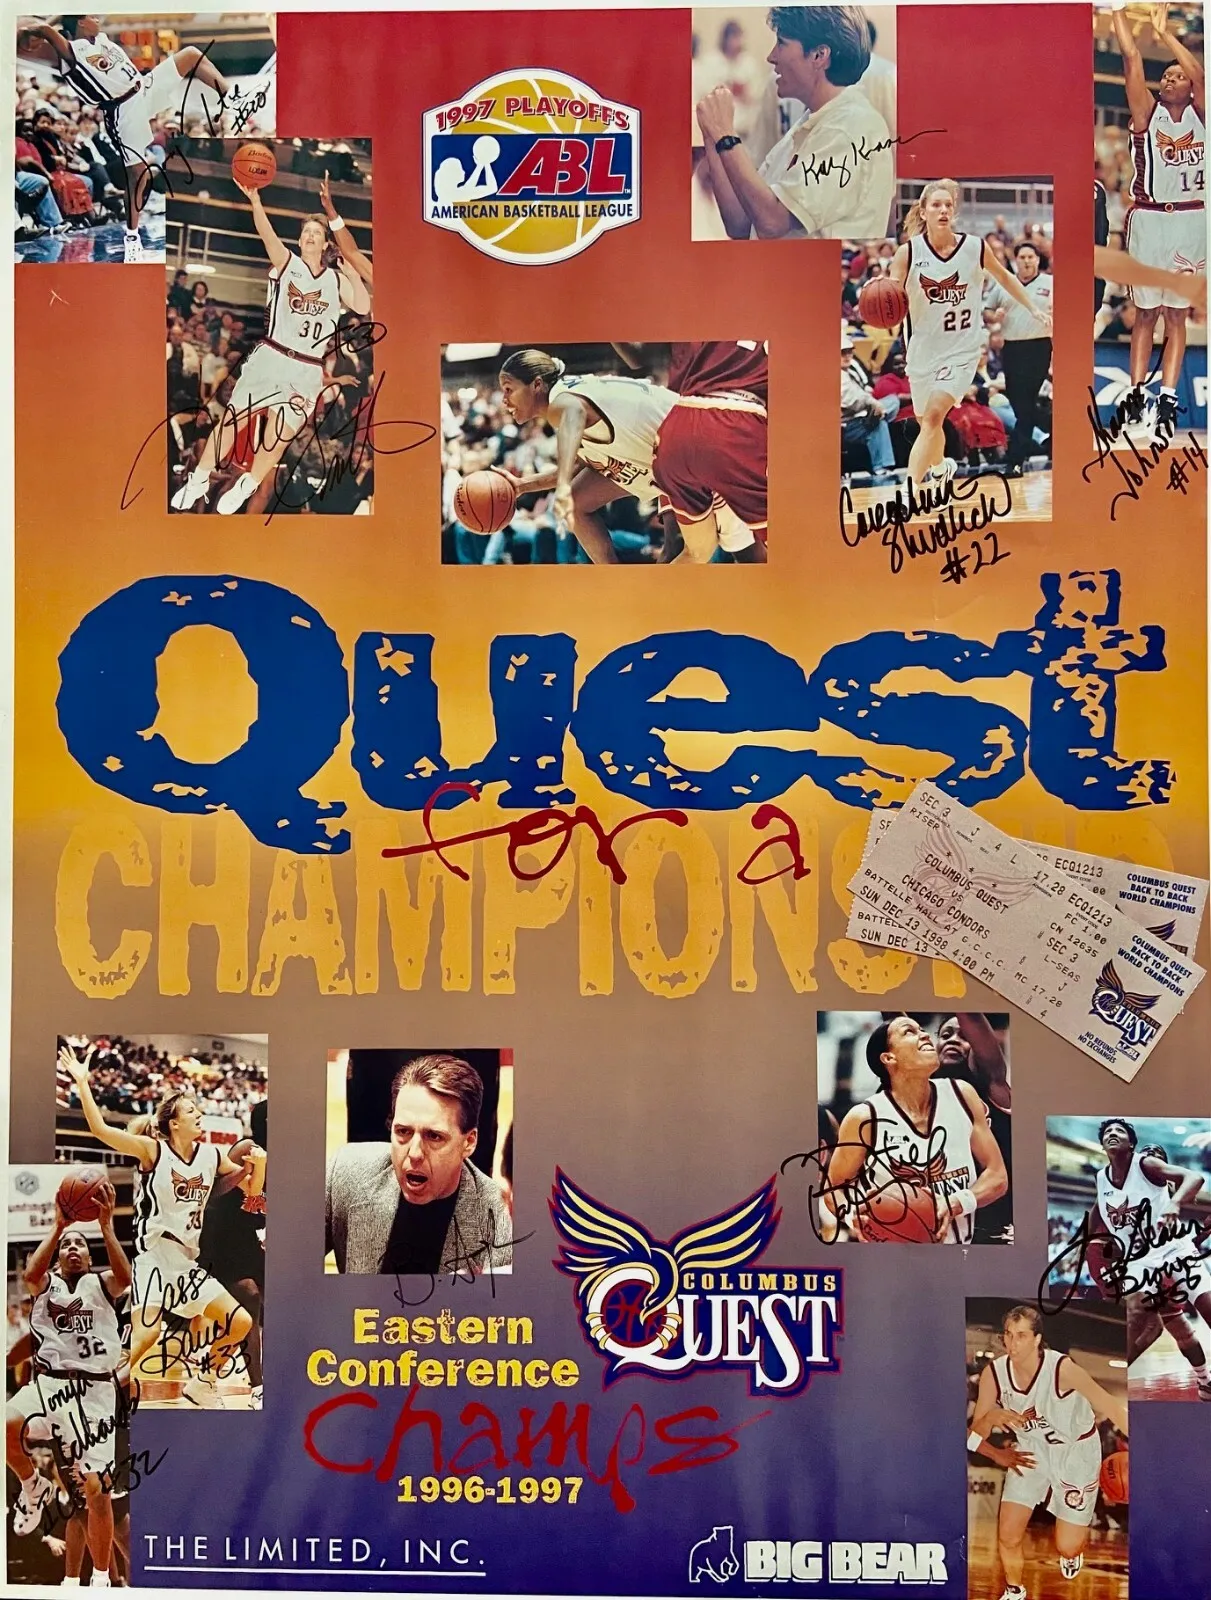 Rare 1996-97 Columbus Quest Abl Championship Poster Signed By Team Katie Smith